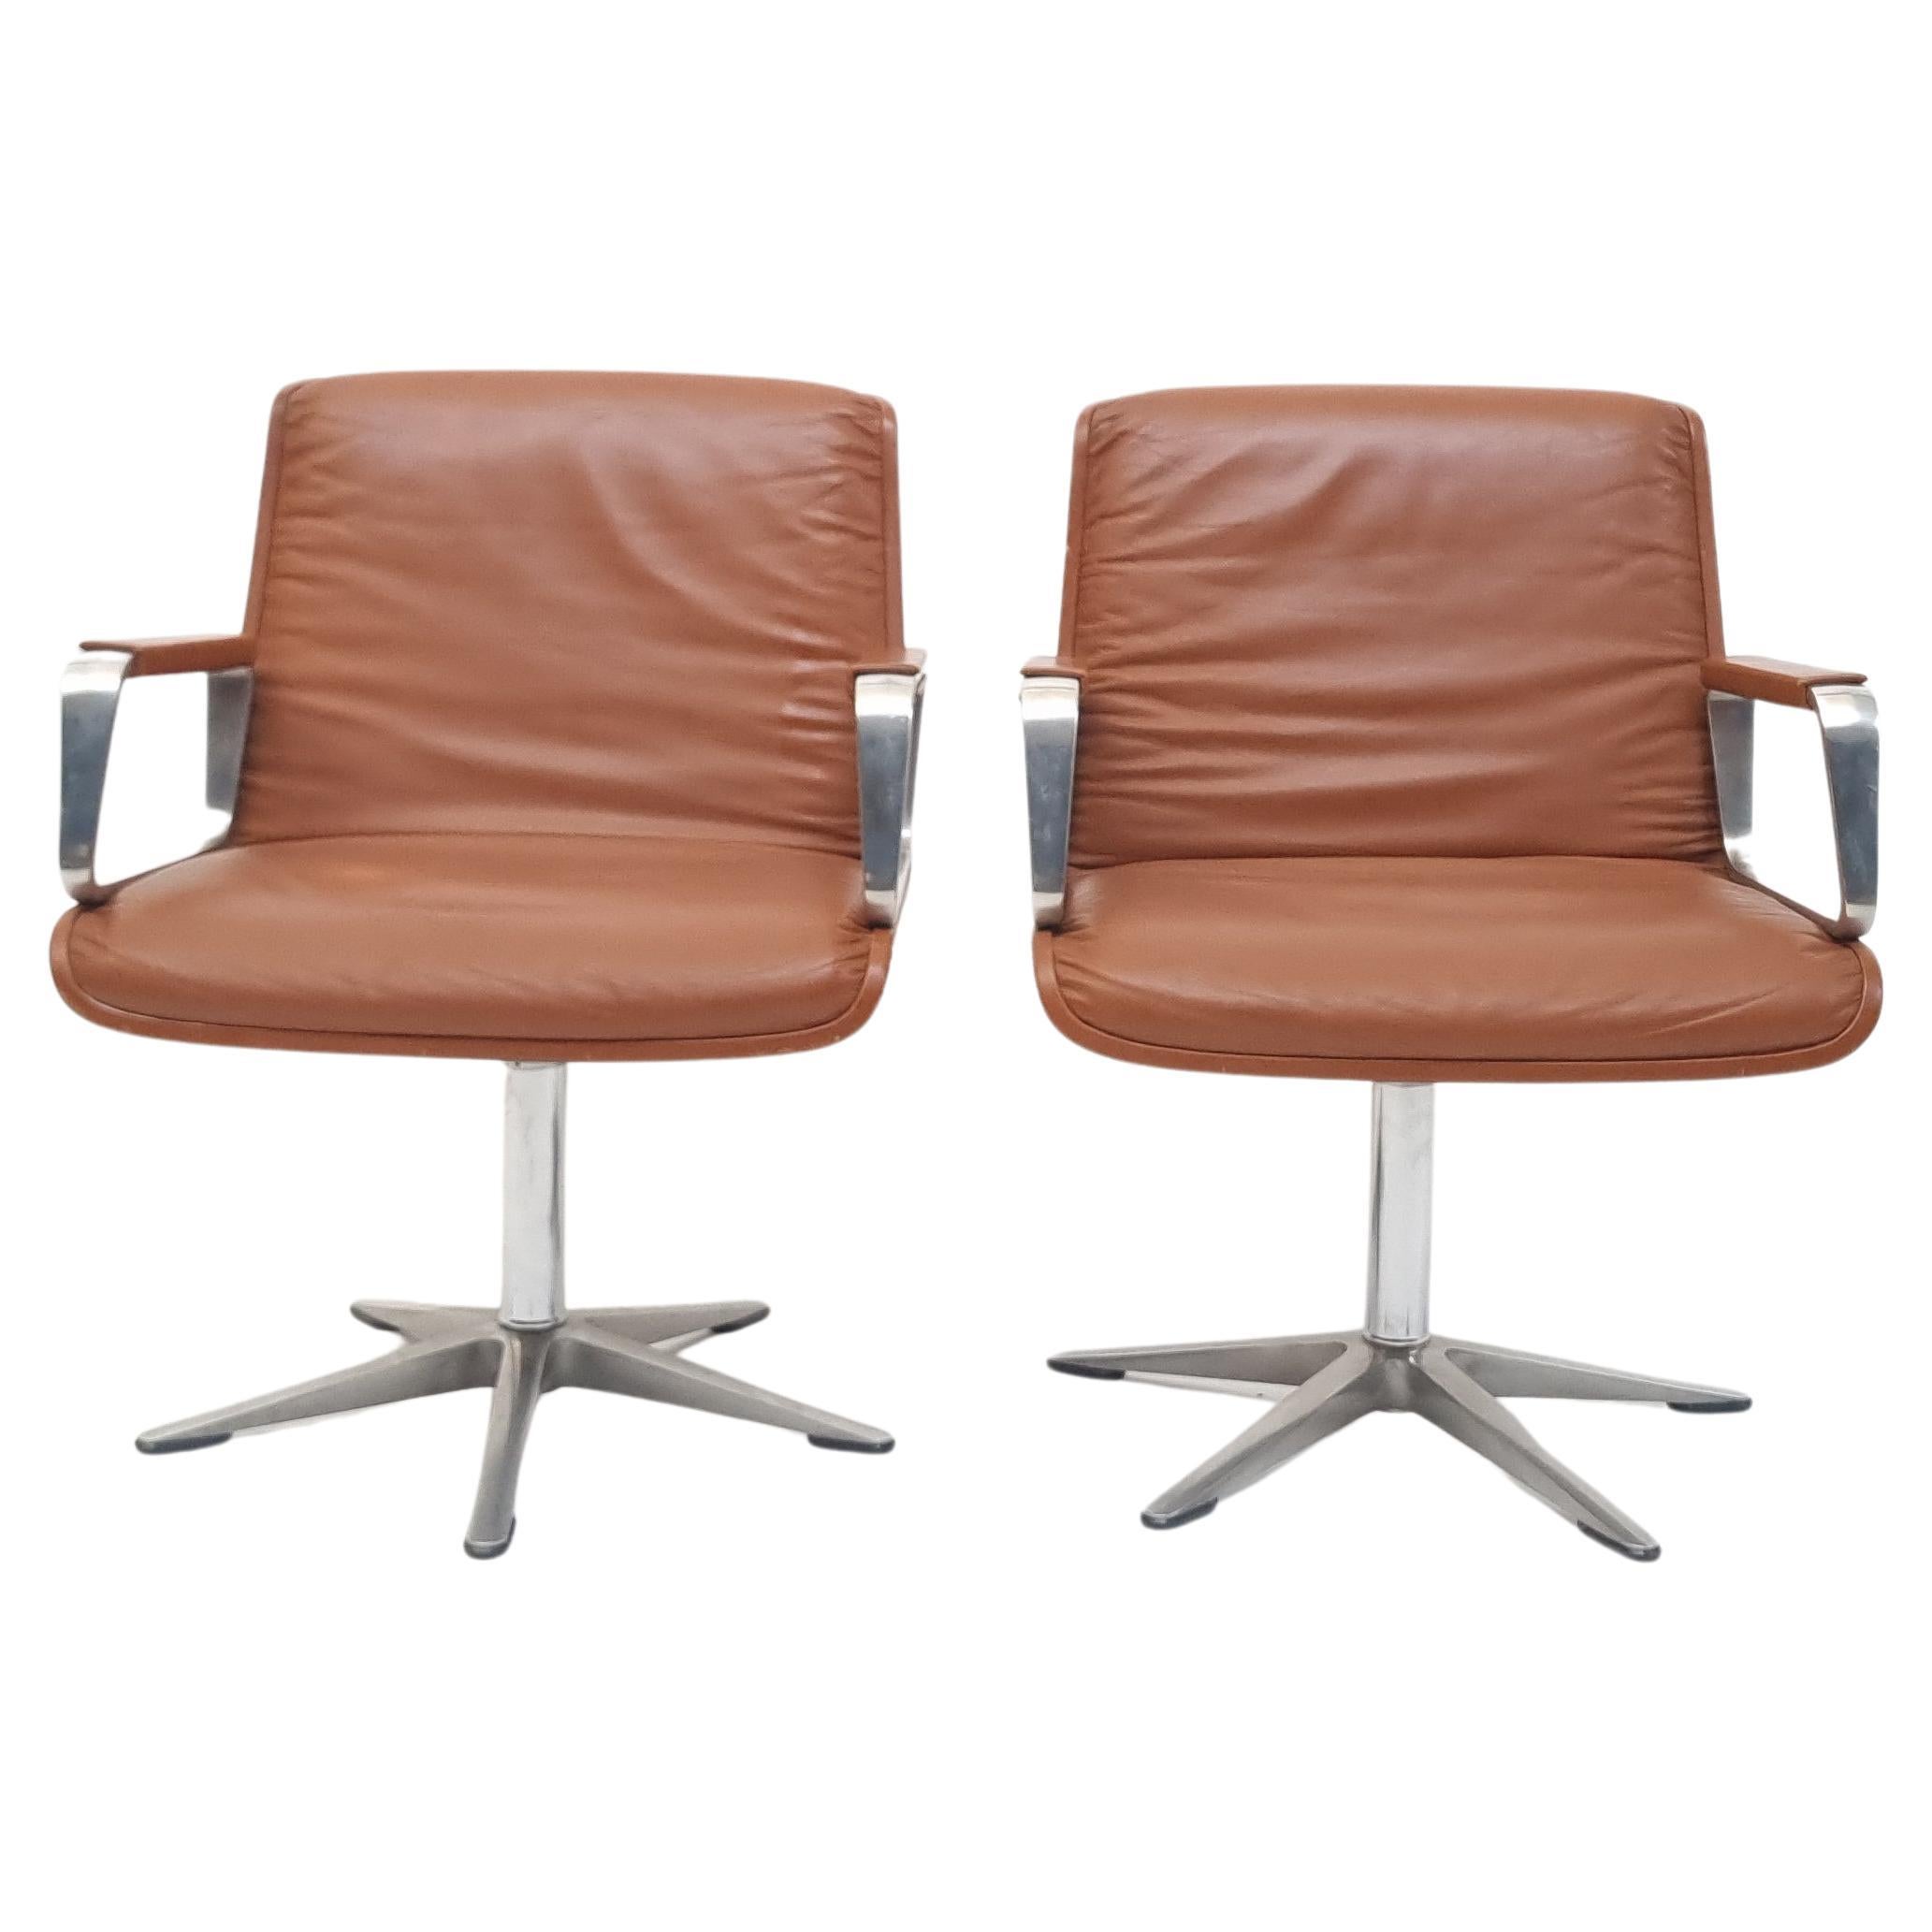 Wilkhahn Chair in Padded Cognac Leather, 1970s